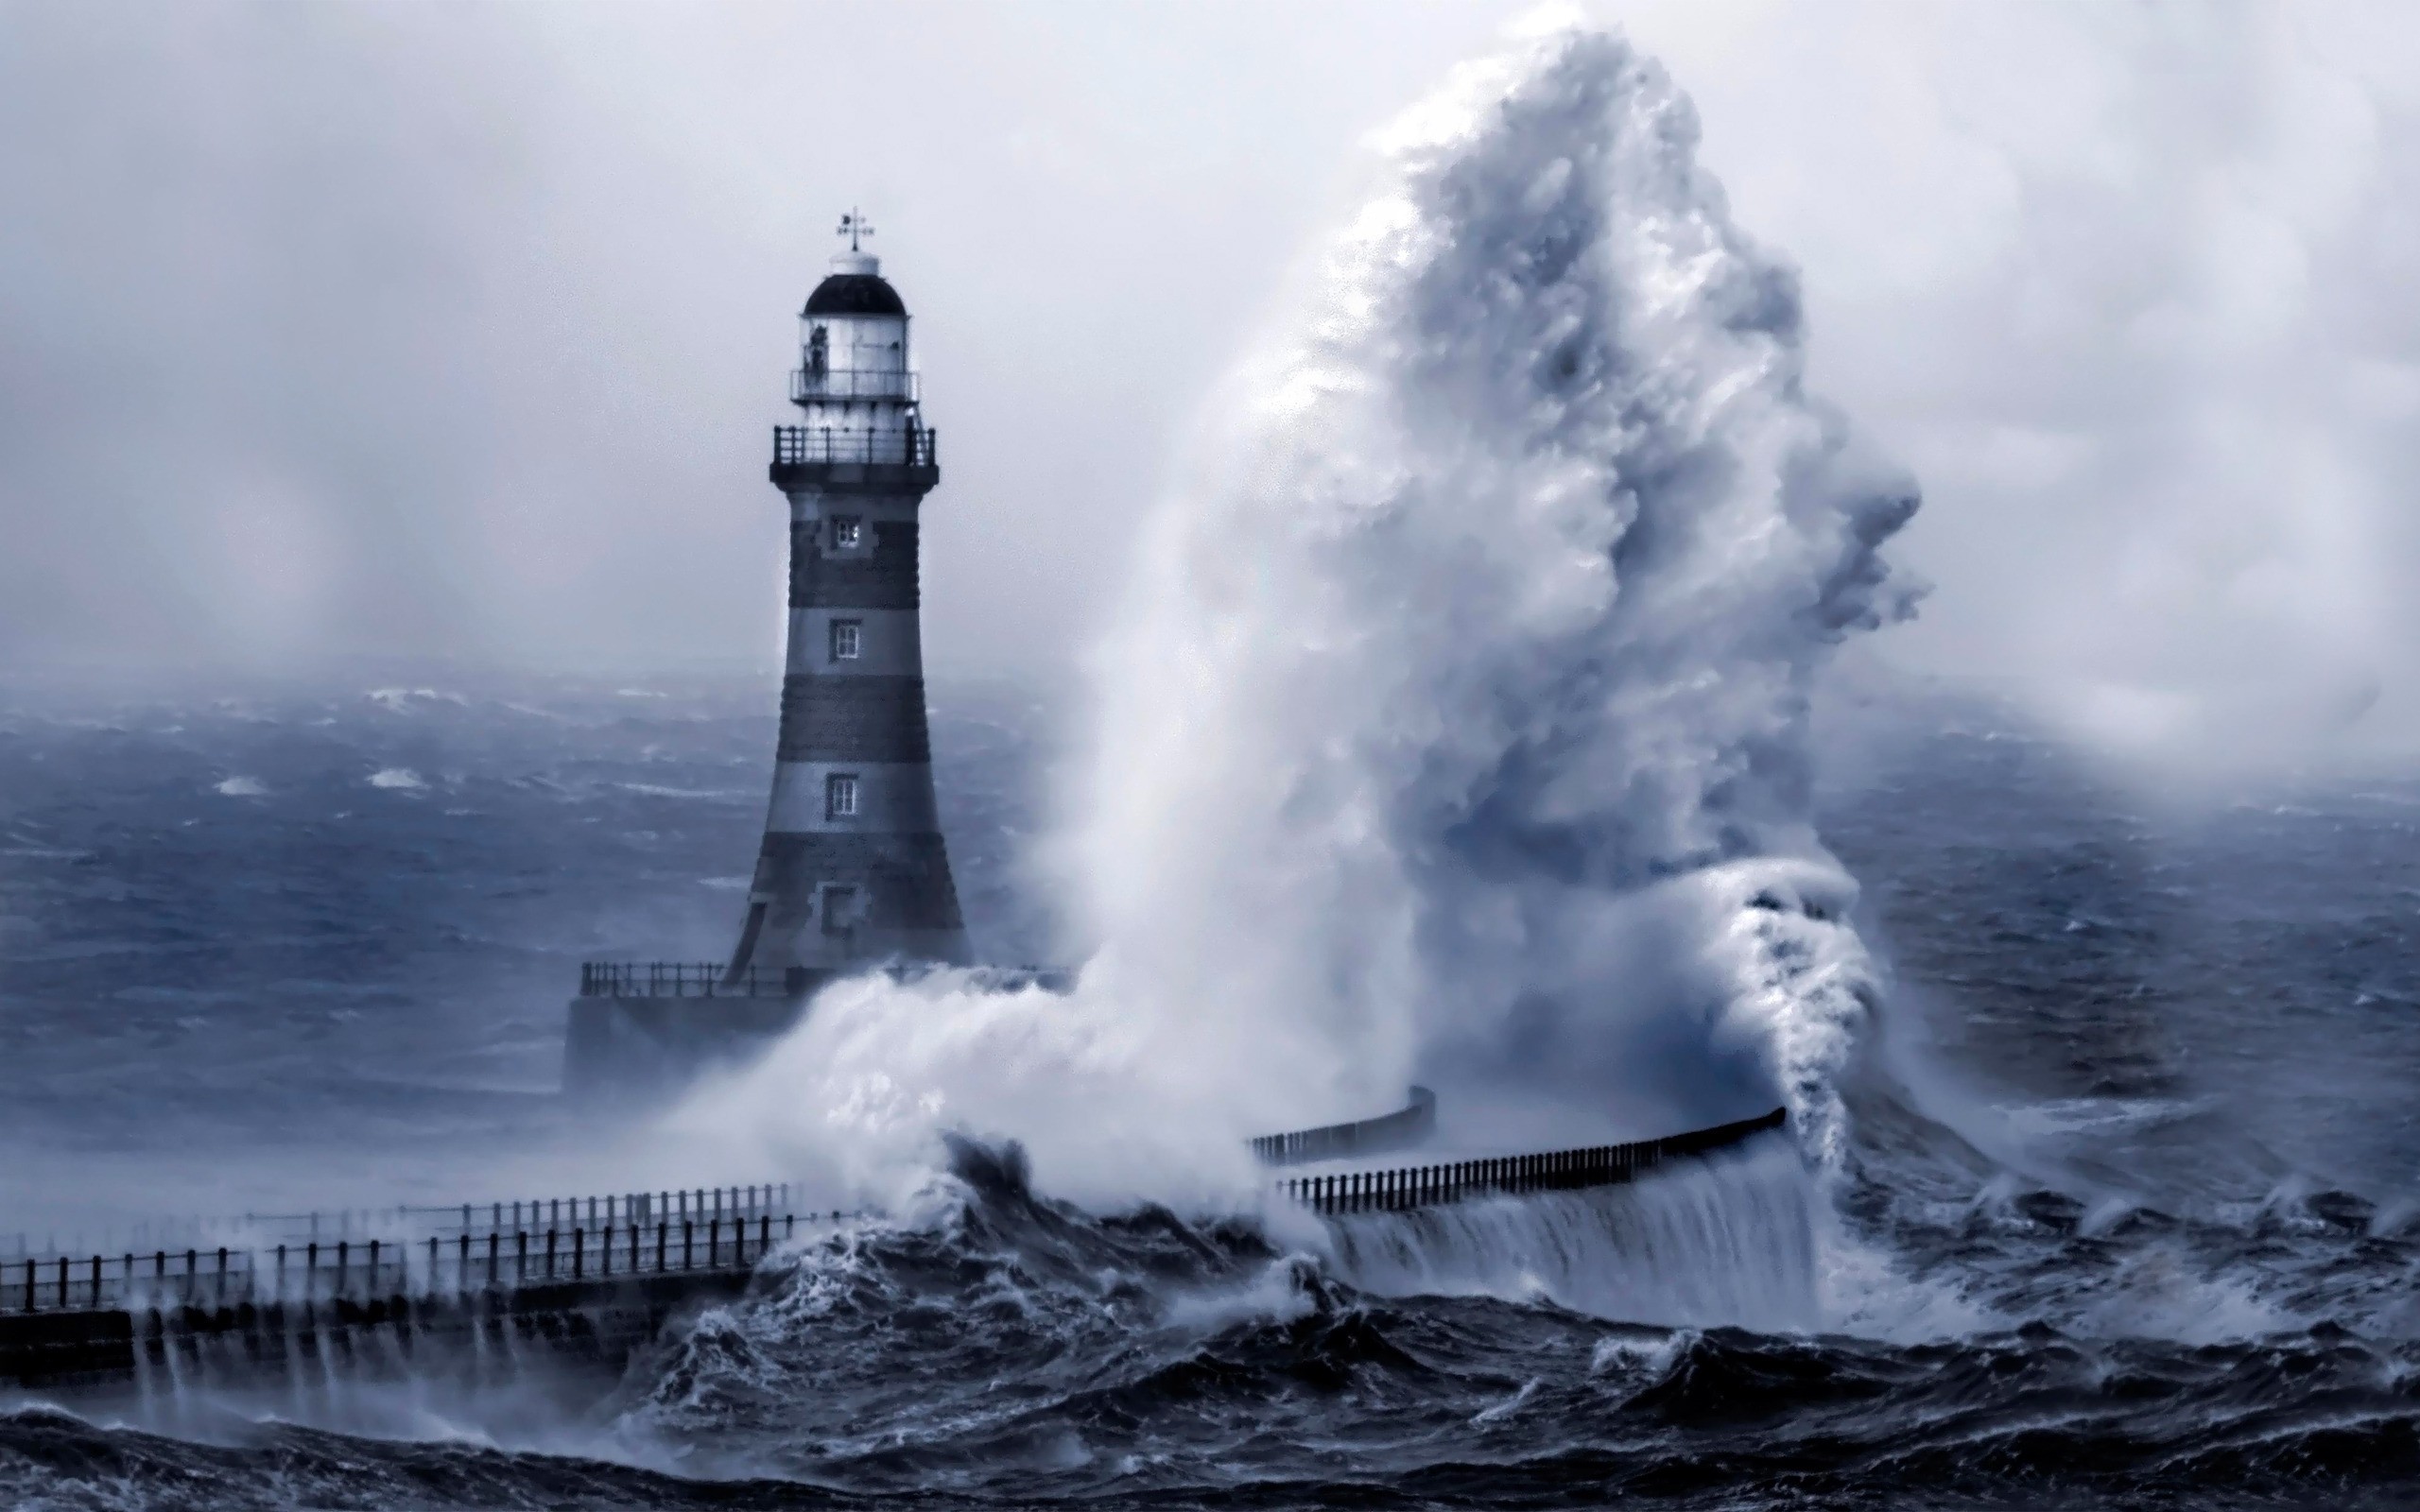 2560x1600 Download Free Lighthouse Wallpaper.